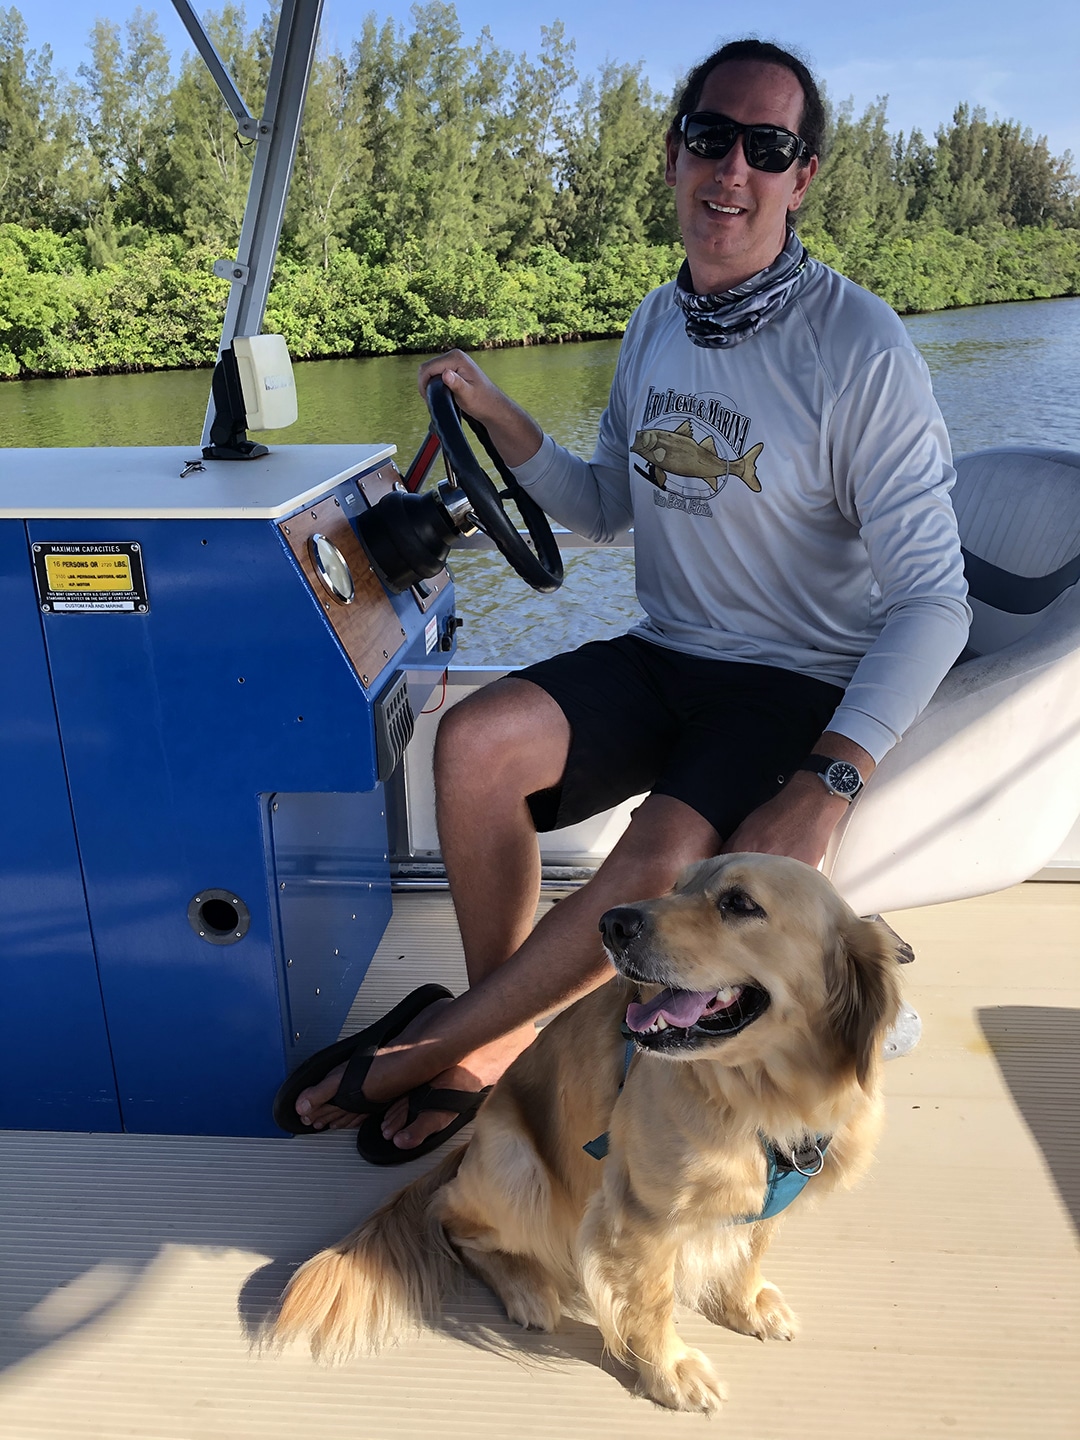 Vero Tackle owner Chris Woodruff and dog Mildred giving boat tour